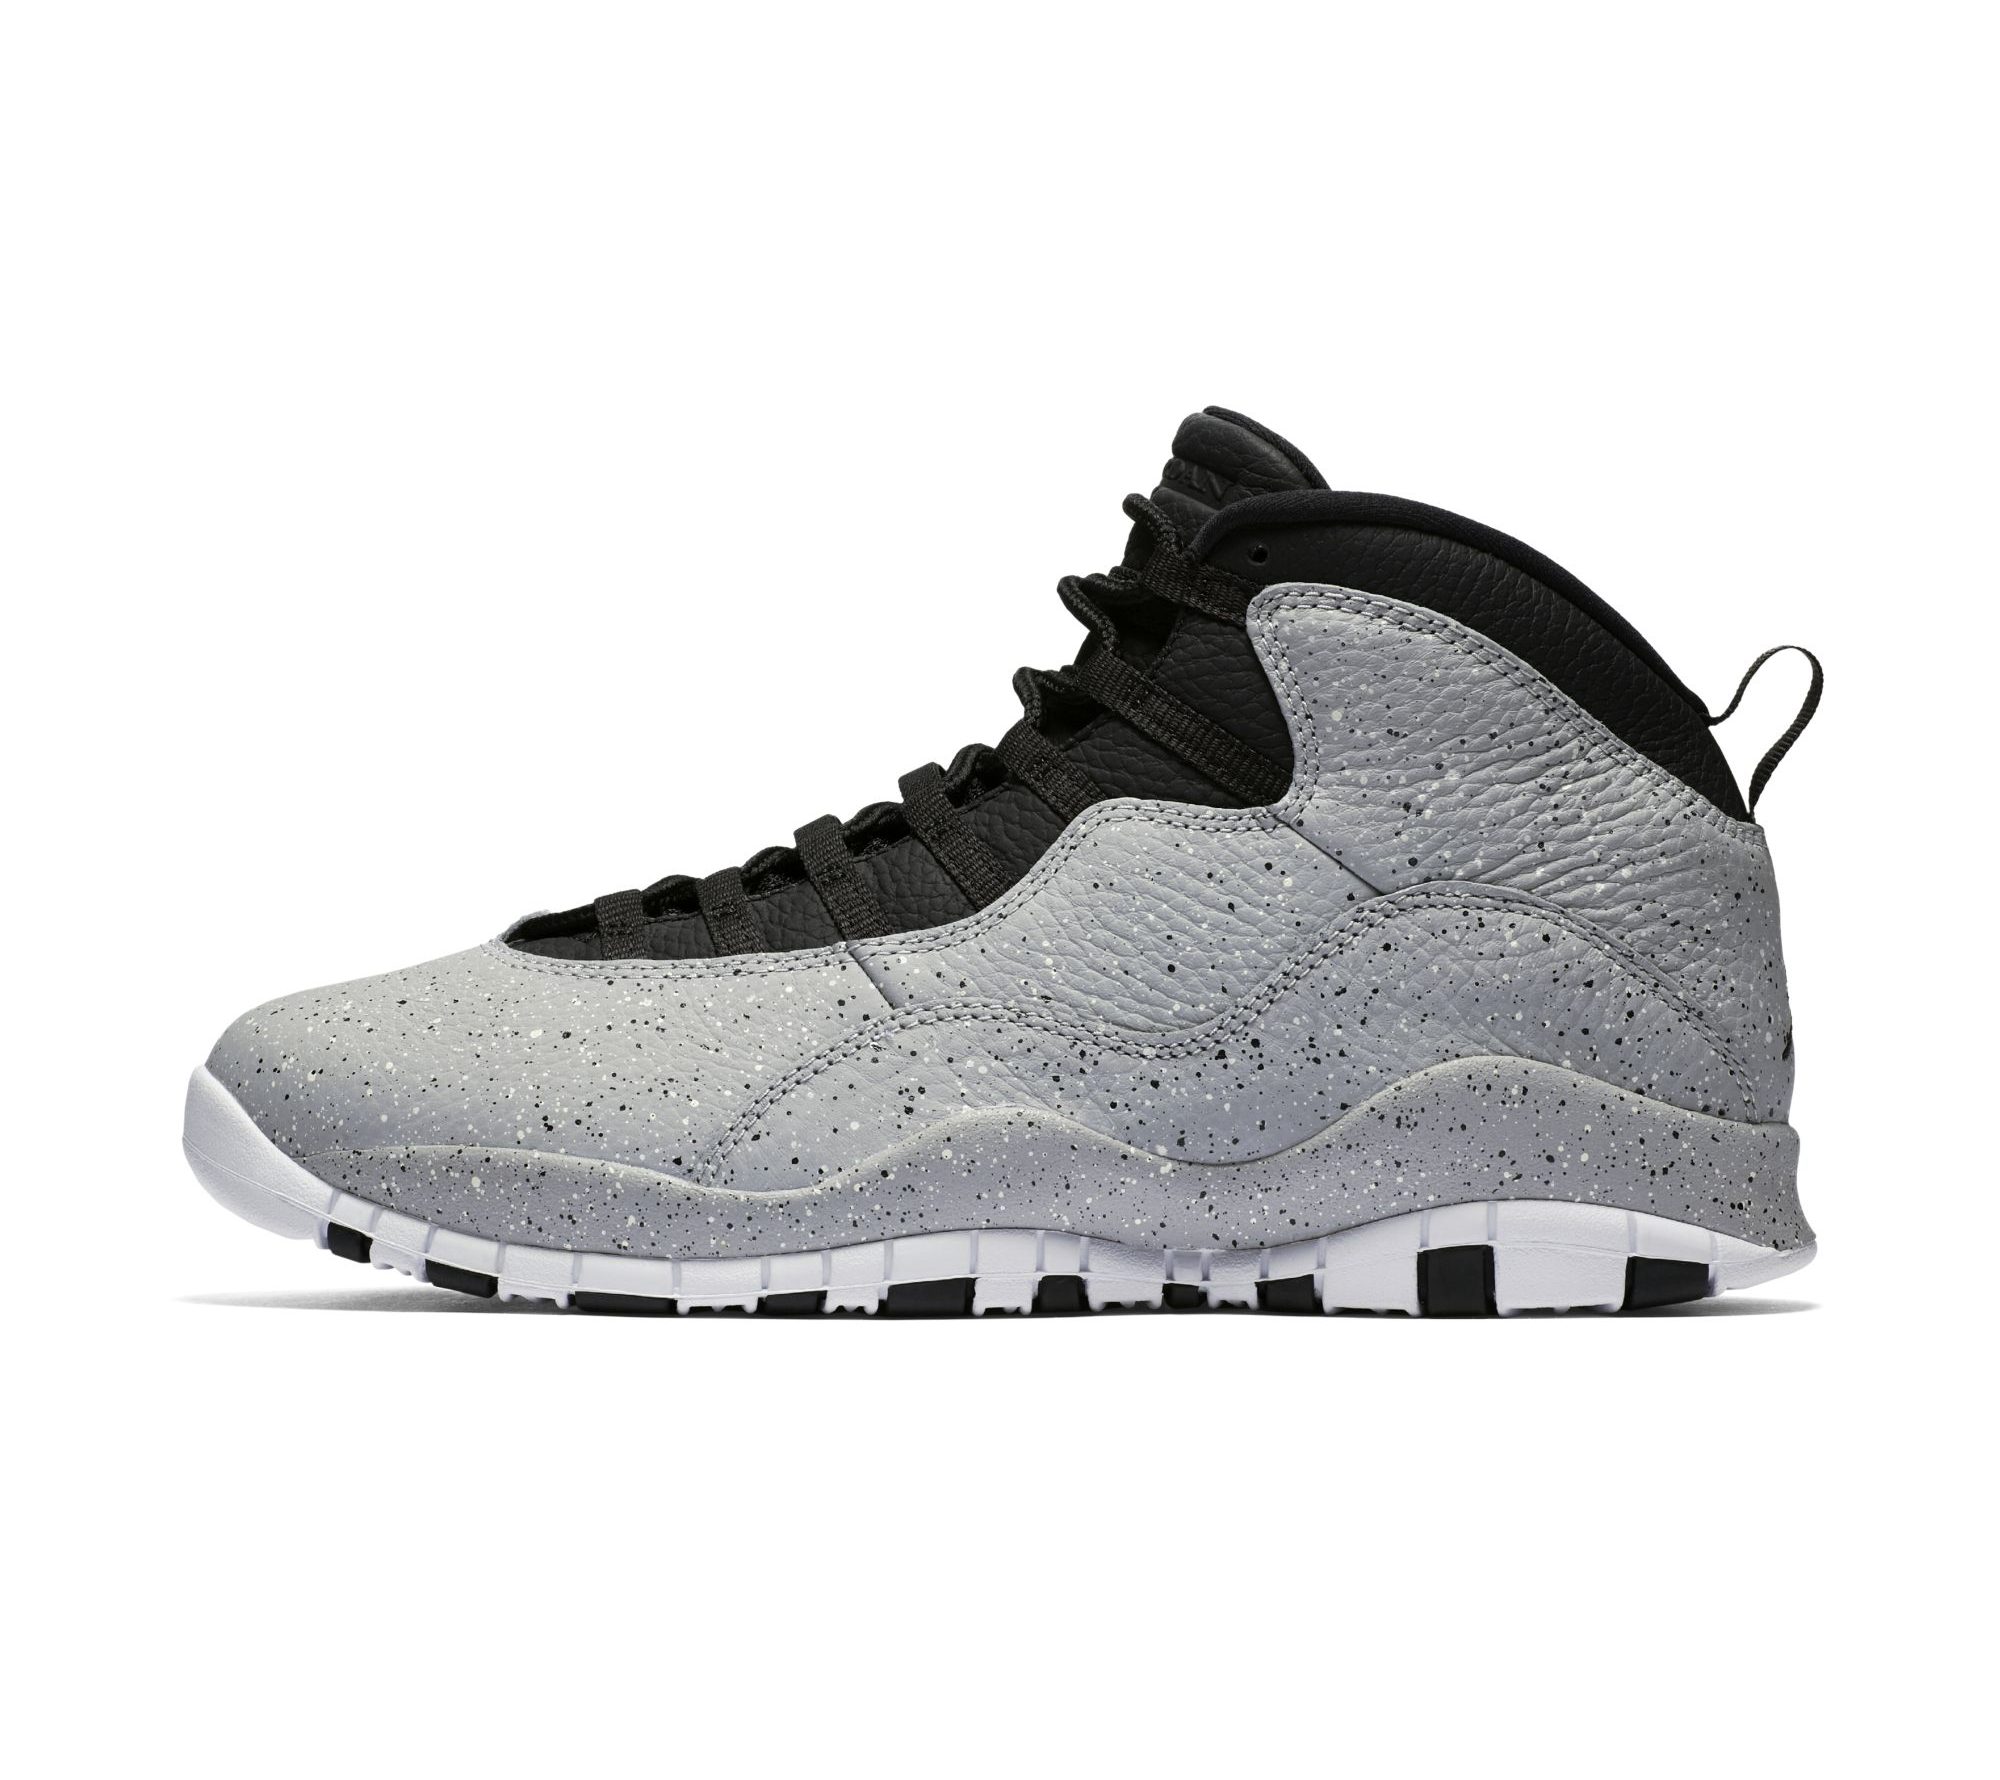 The Air Jordan 10 'Cement' is a Nod to 